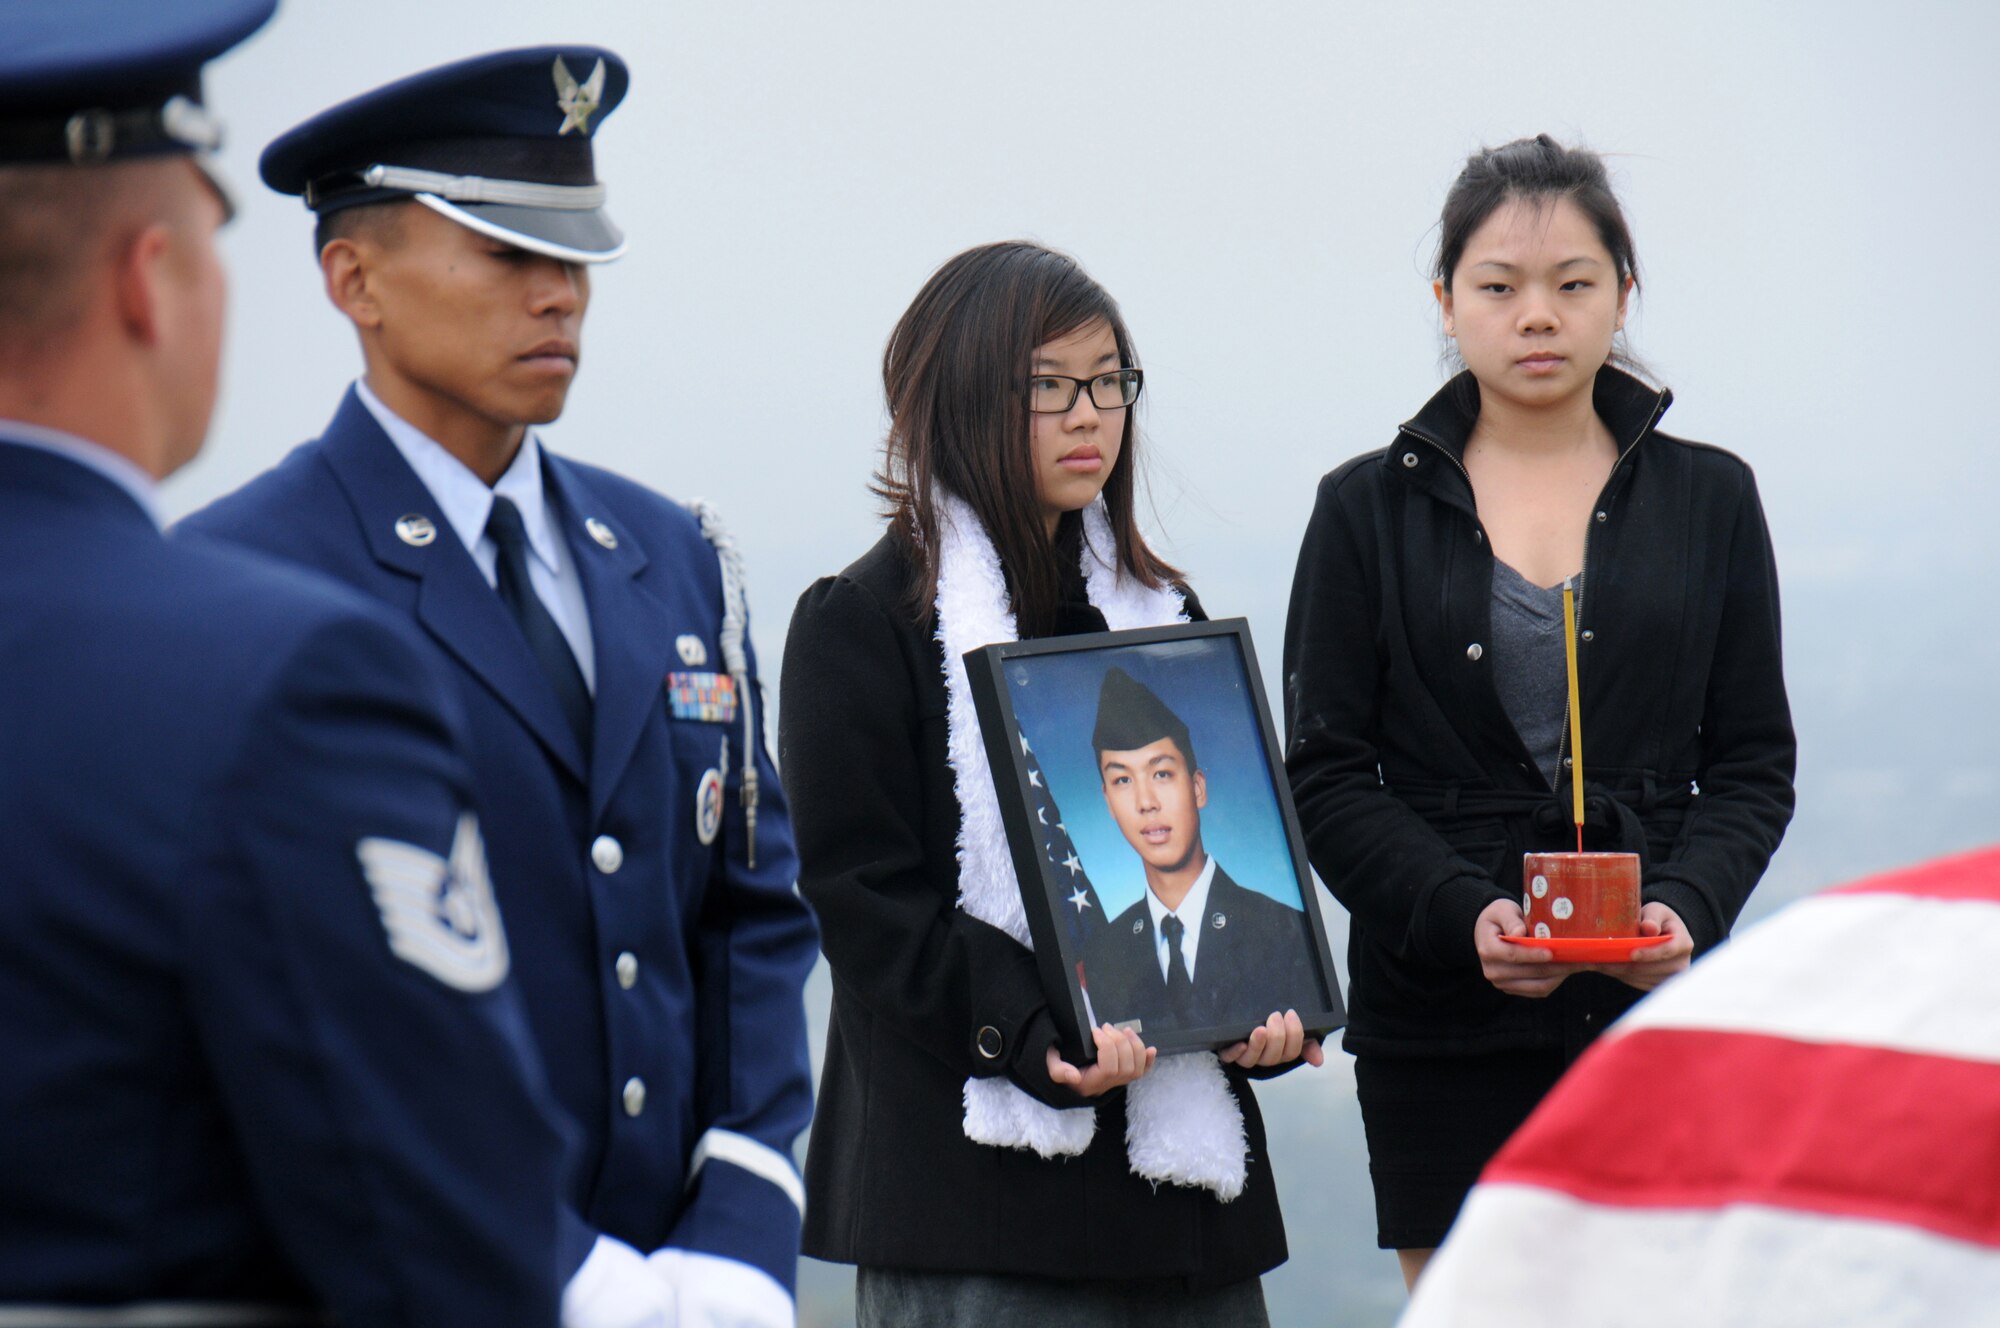 Members of the Blue Eagles Honor Guard, a “total force honor guard” comprised of Air Force military members from Los Angeles and Edwards Air Force Bases and March Air Reserve Base, stand alongside Staff Sgt. Ho Tak “William” Leung’s cousins Krystal Chu, holding the photo, and Sofi Lam. Air Force photo by Joe Juarez.